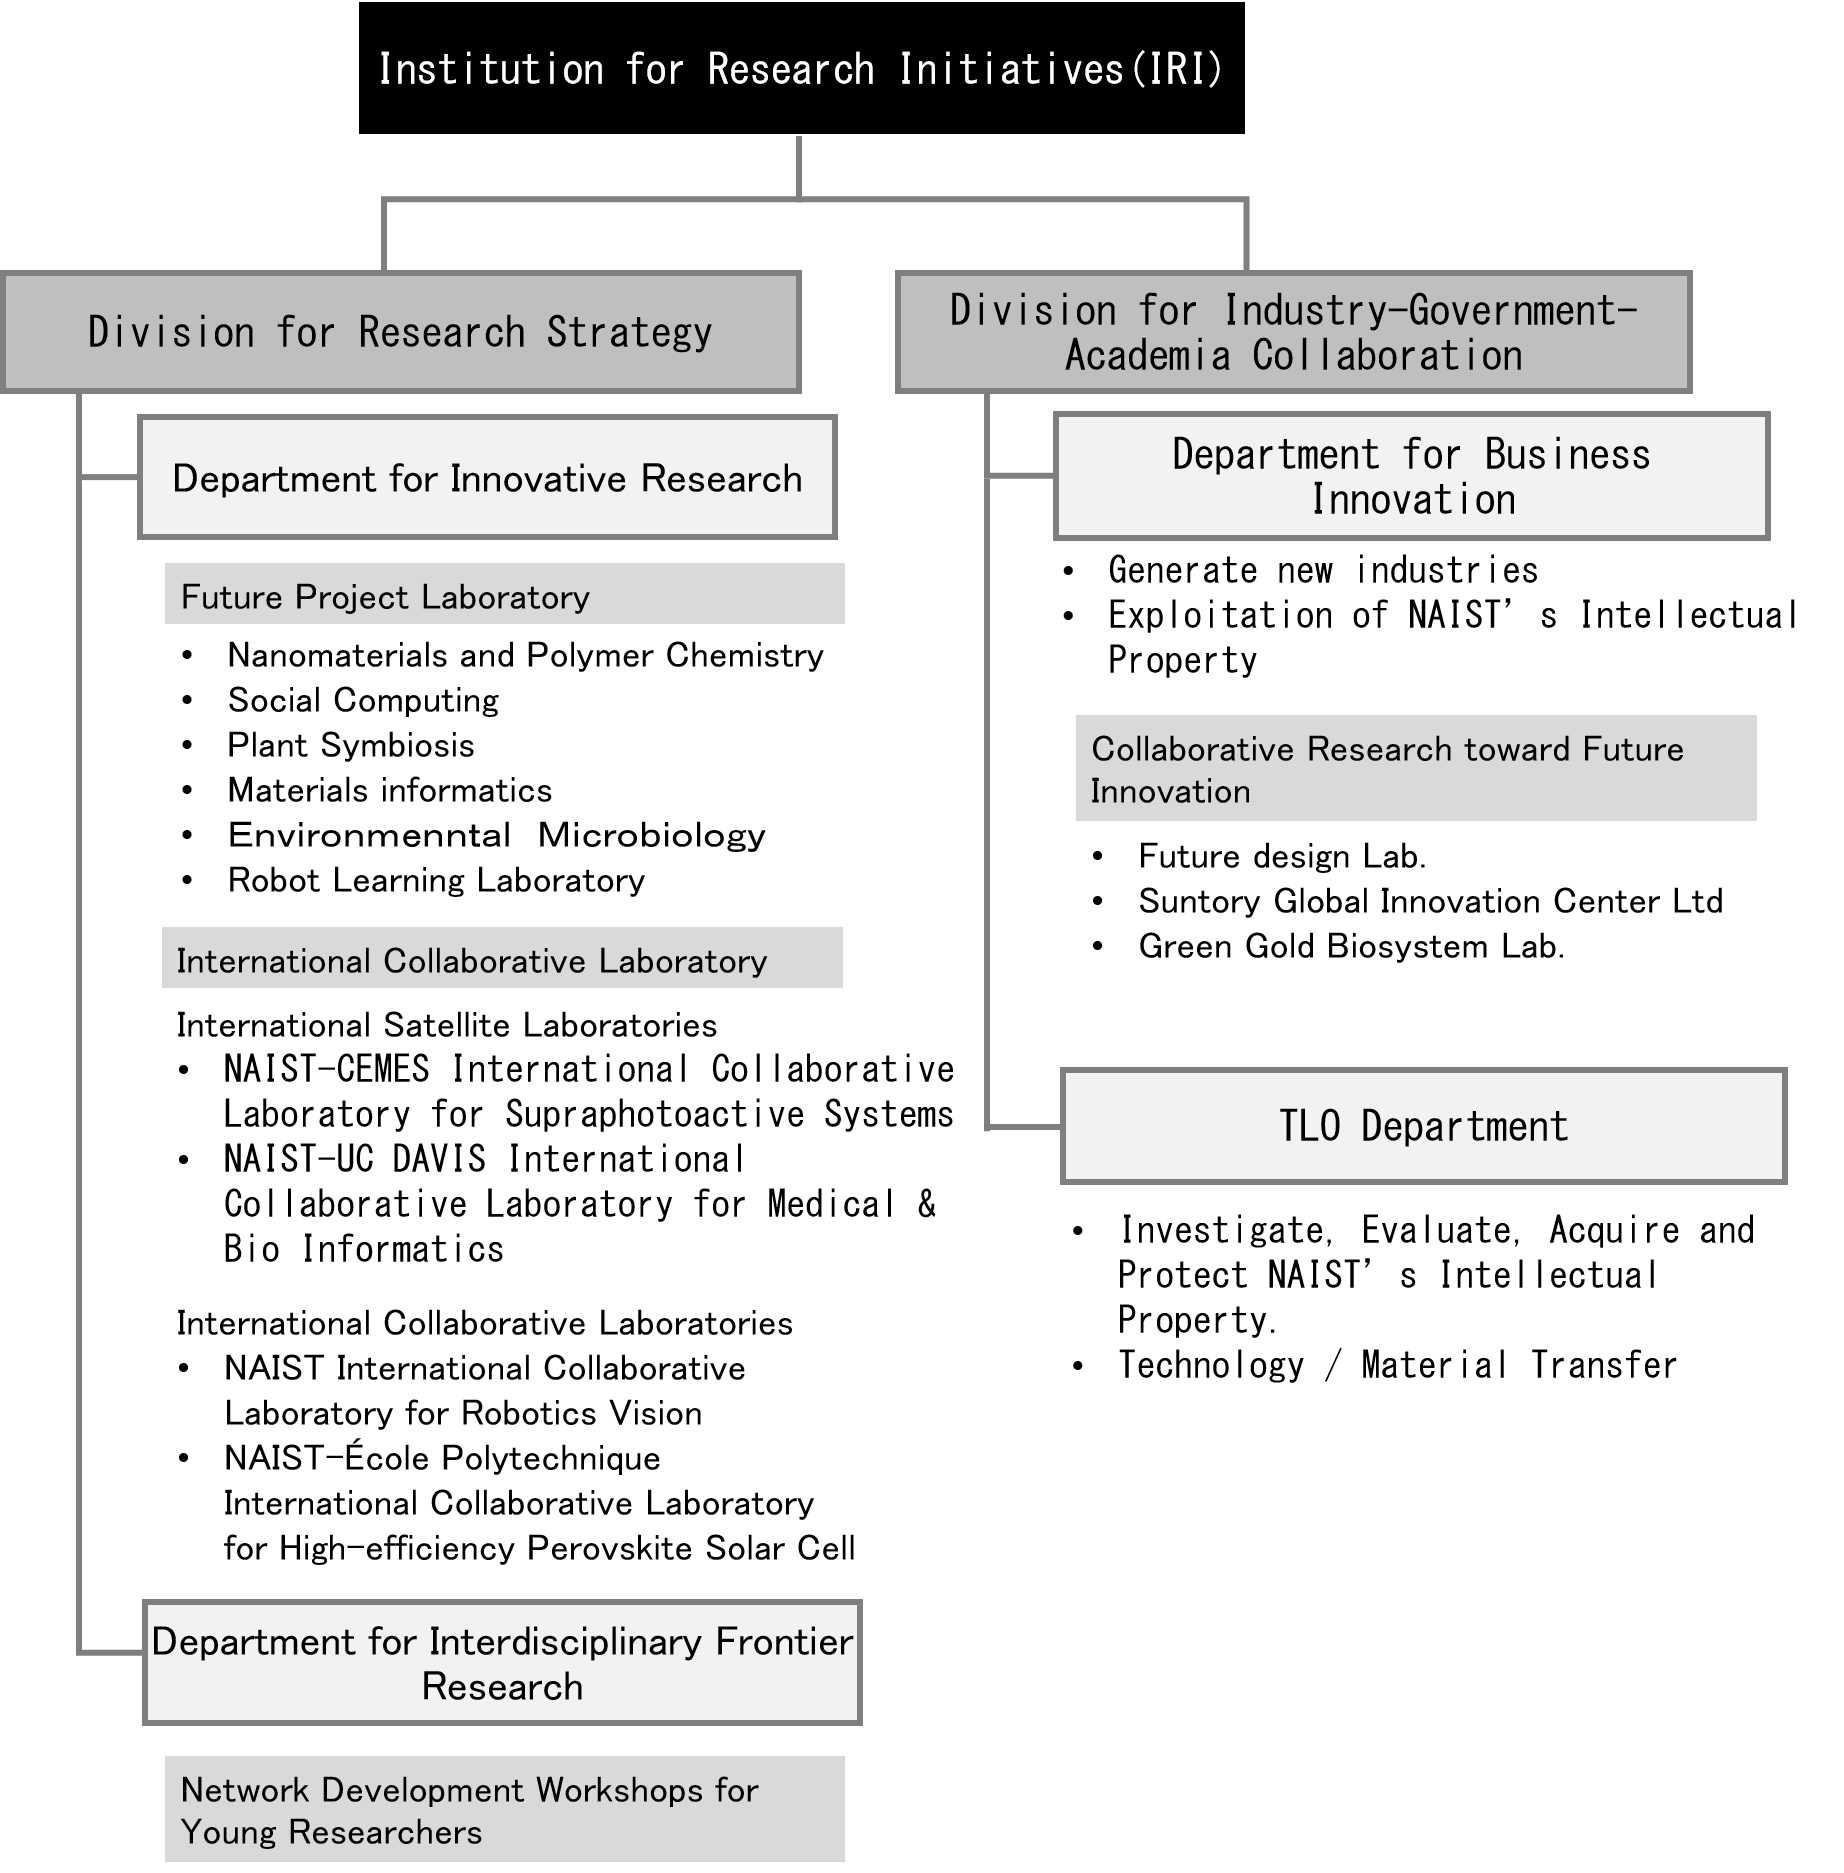 Structure of Institute for Research Initiatives